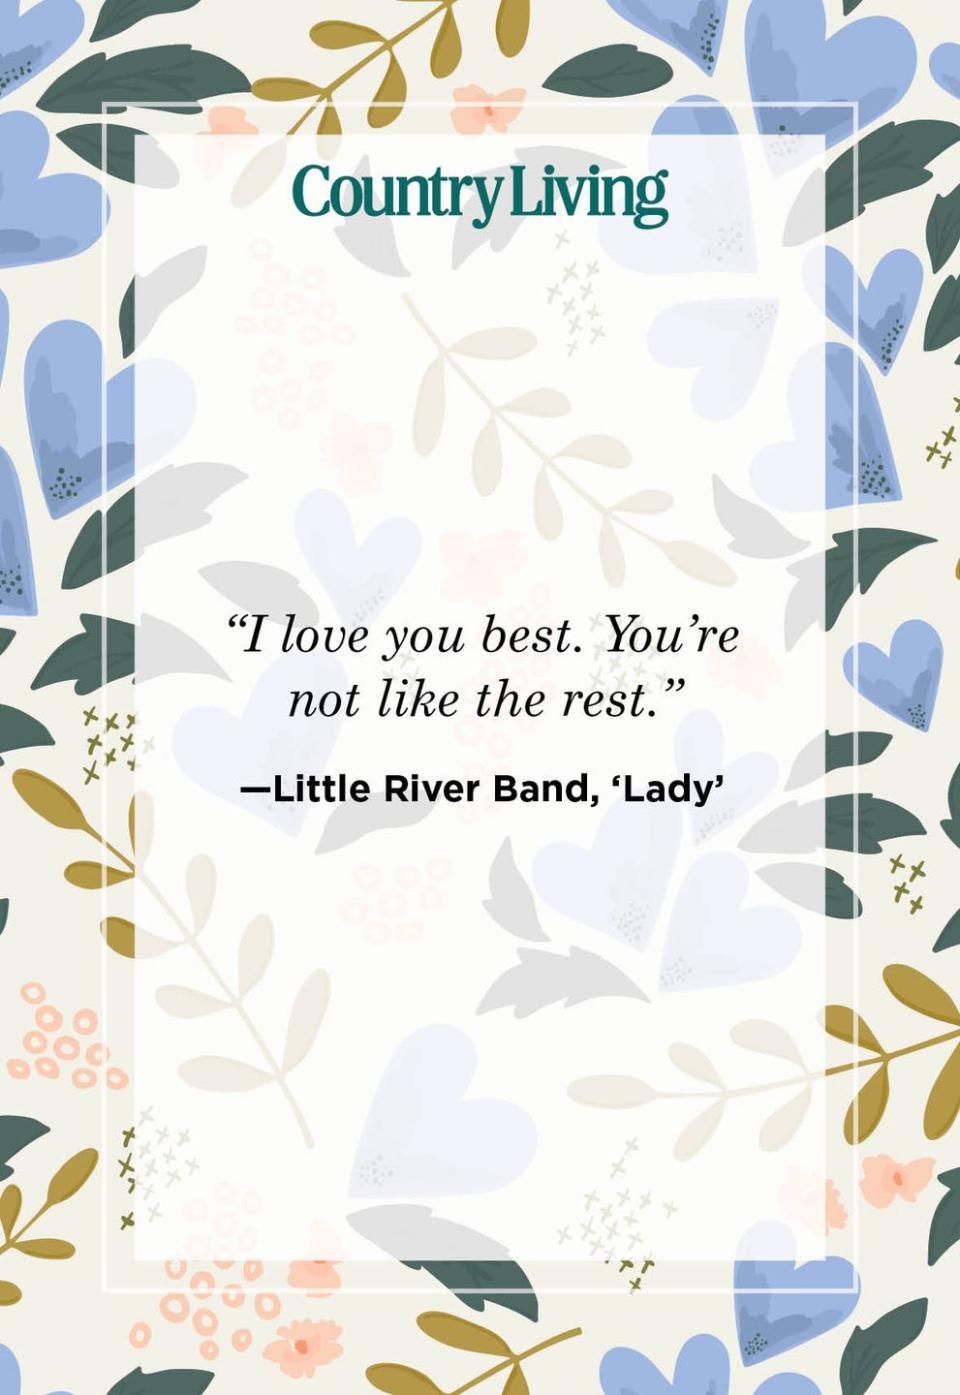 2) Little River Band, 'Lady'